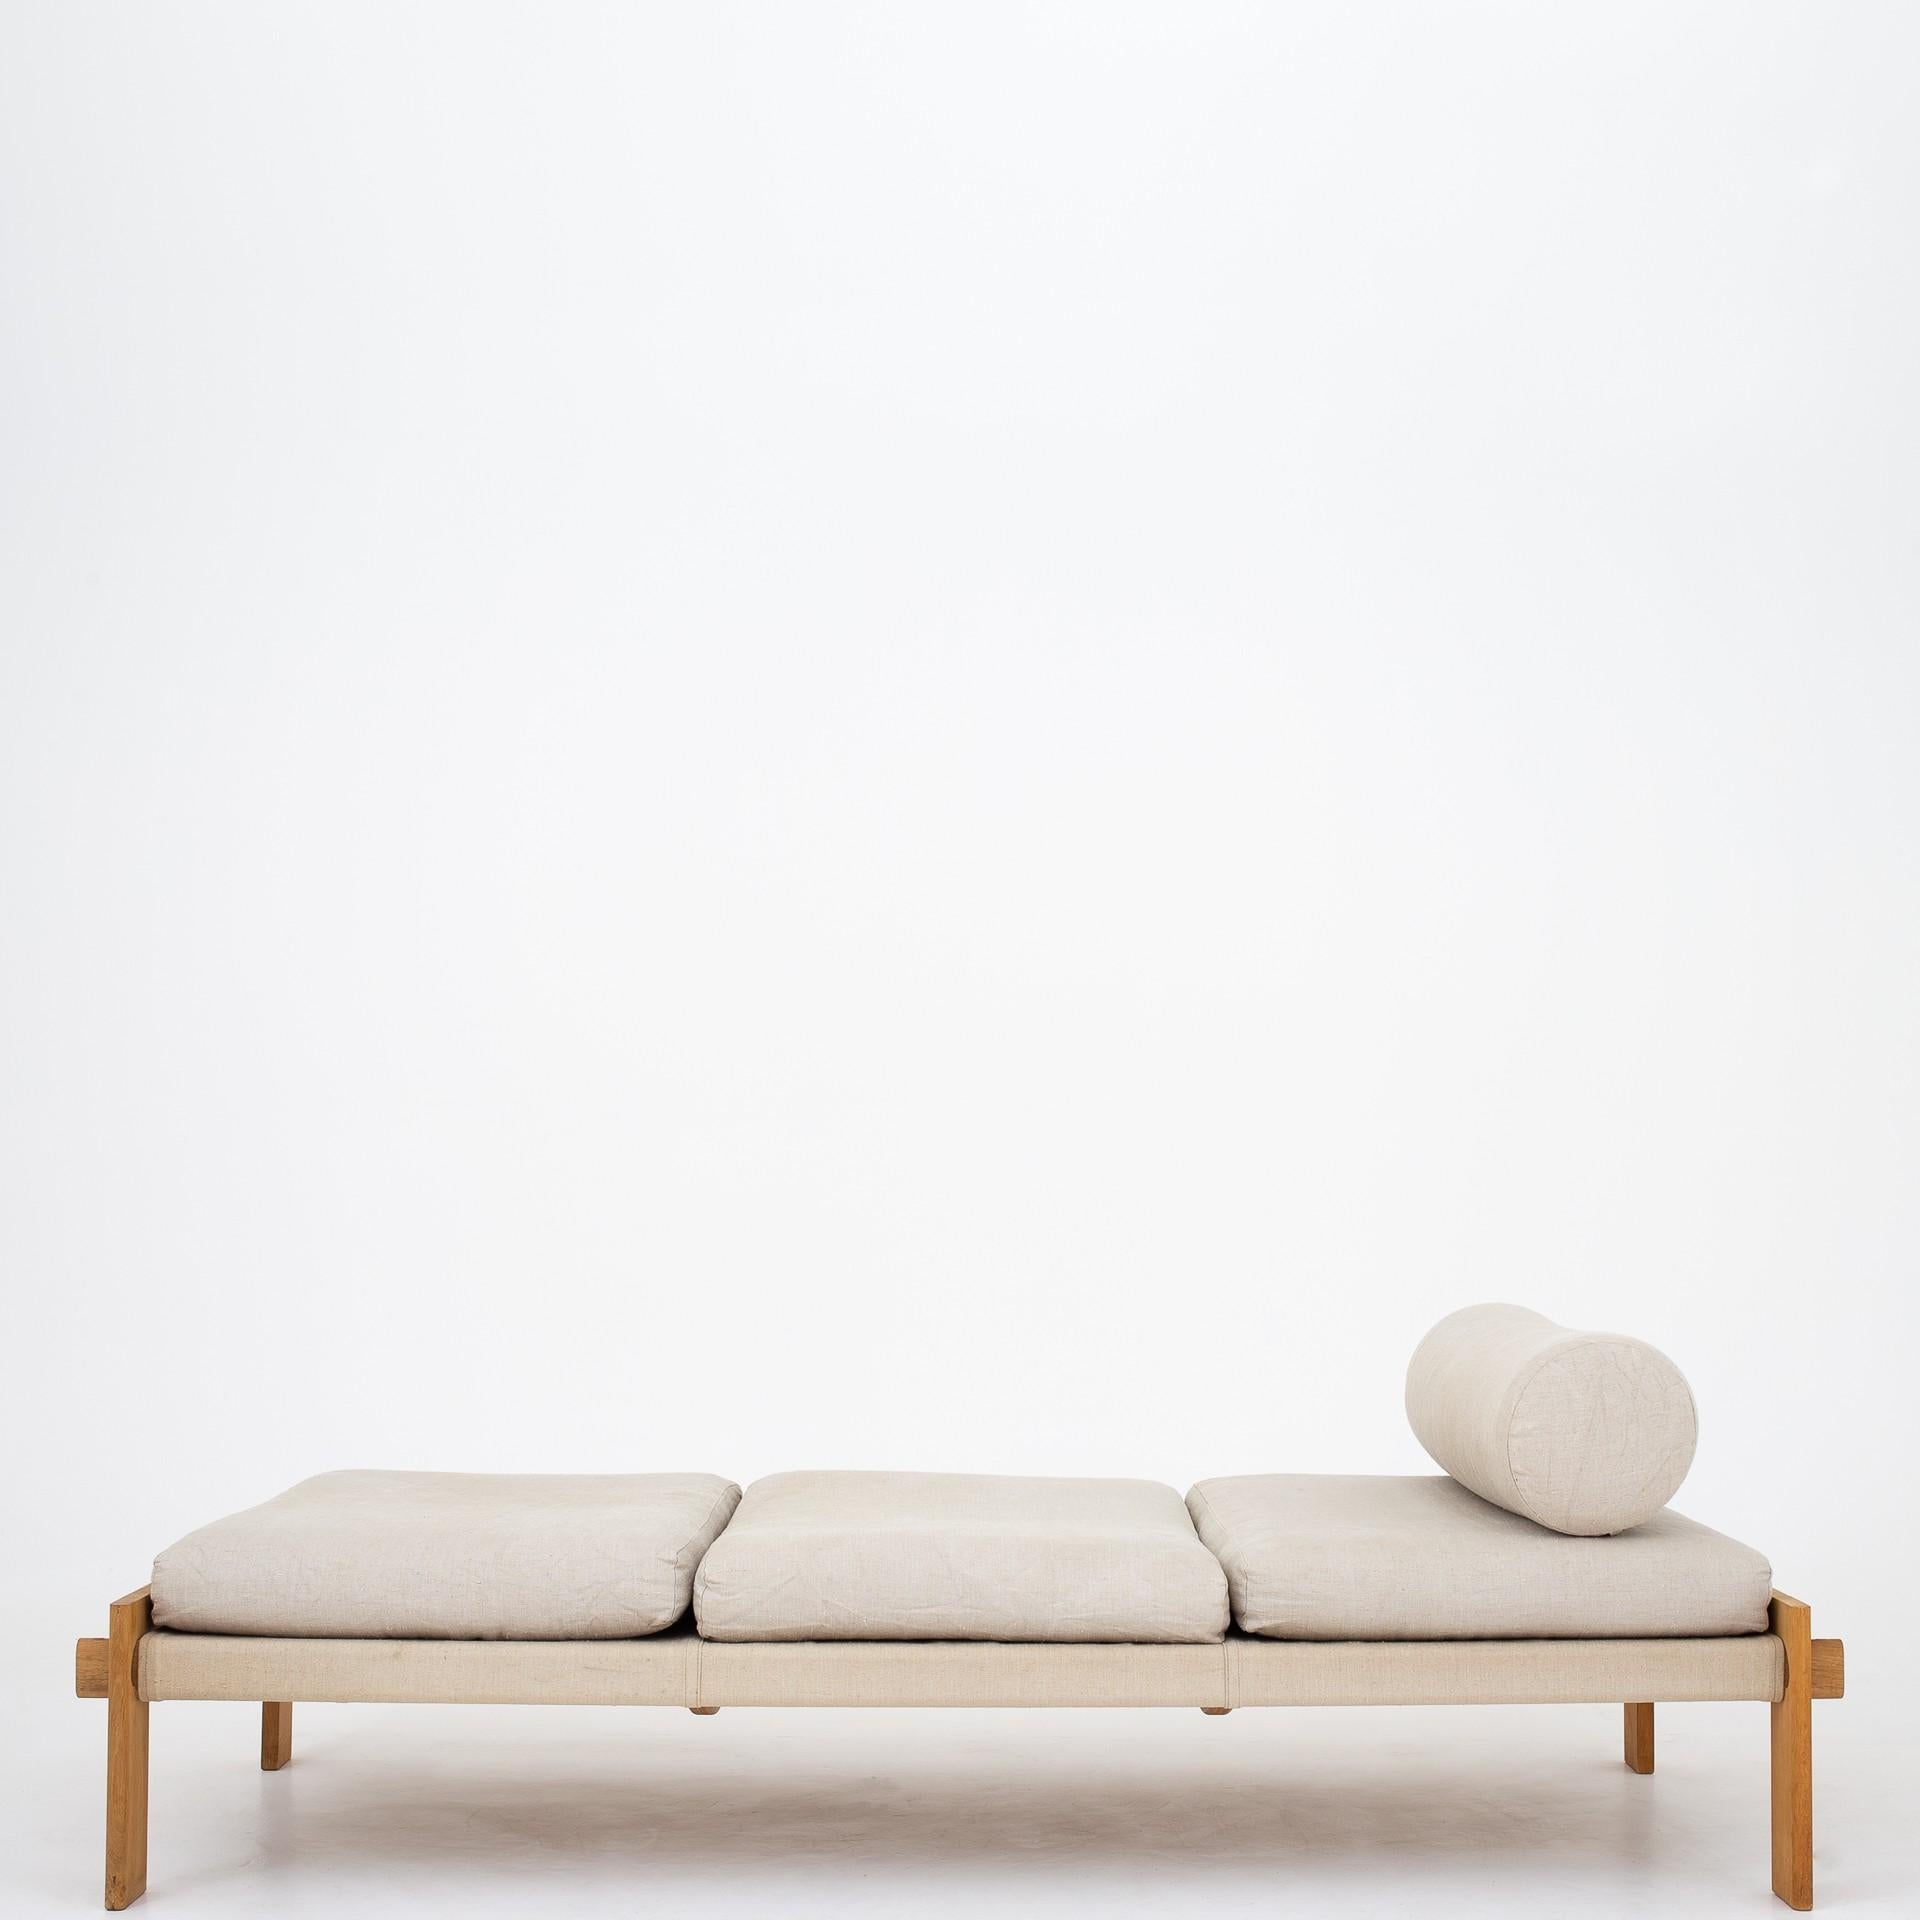 Set consisting of two daybeds in oak and canvas and coffee table with folding plate and storage room. Maker Tage Poulsen.